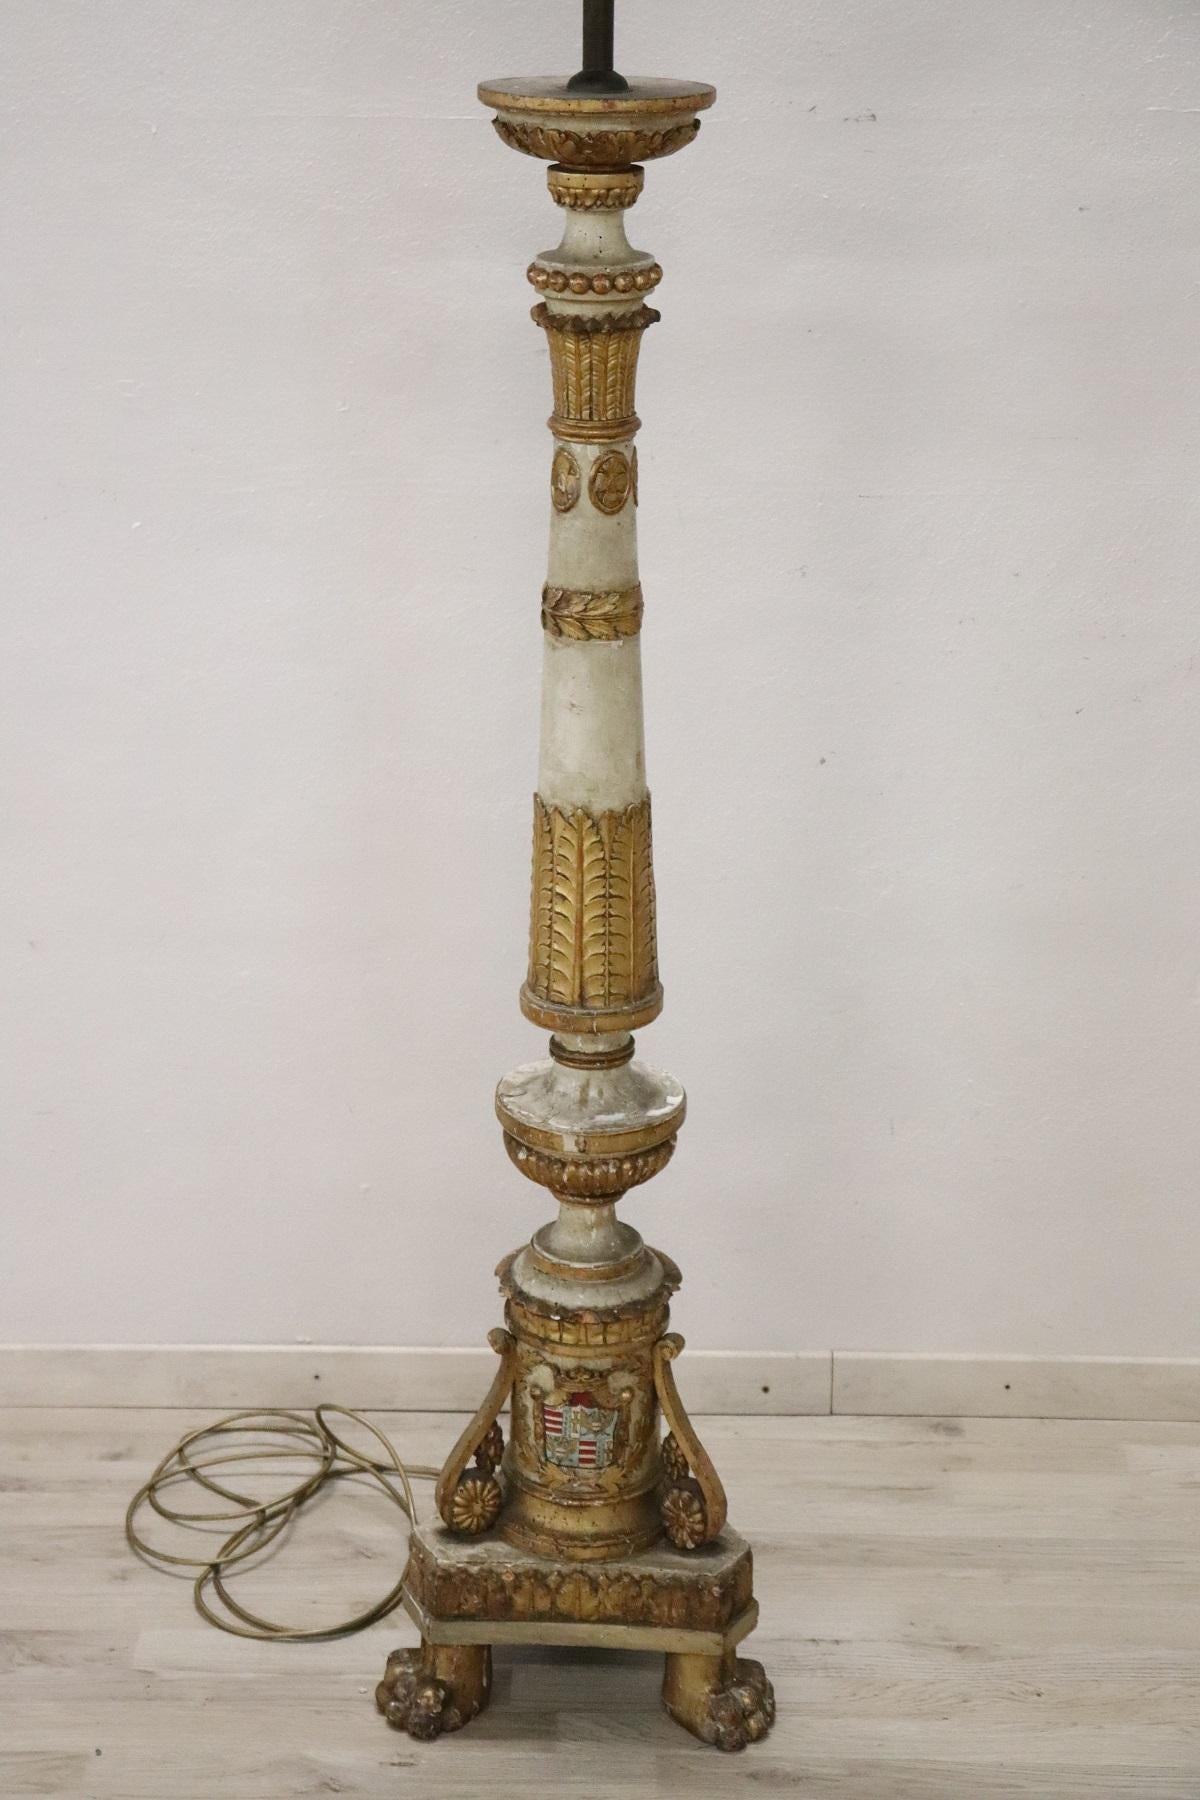 Large carved and gilded wooden floor lamp antique torchère. It has been electrified for modern use. Made with fine woodcarving work, the turned body has many decorative elements and a heraldic crest on the lower part. Beautiful small flattened feet.